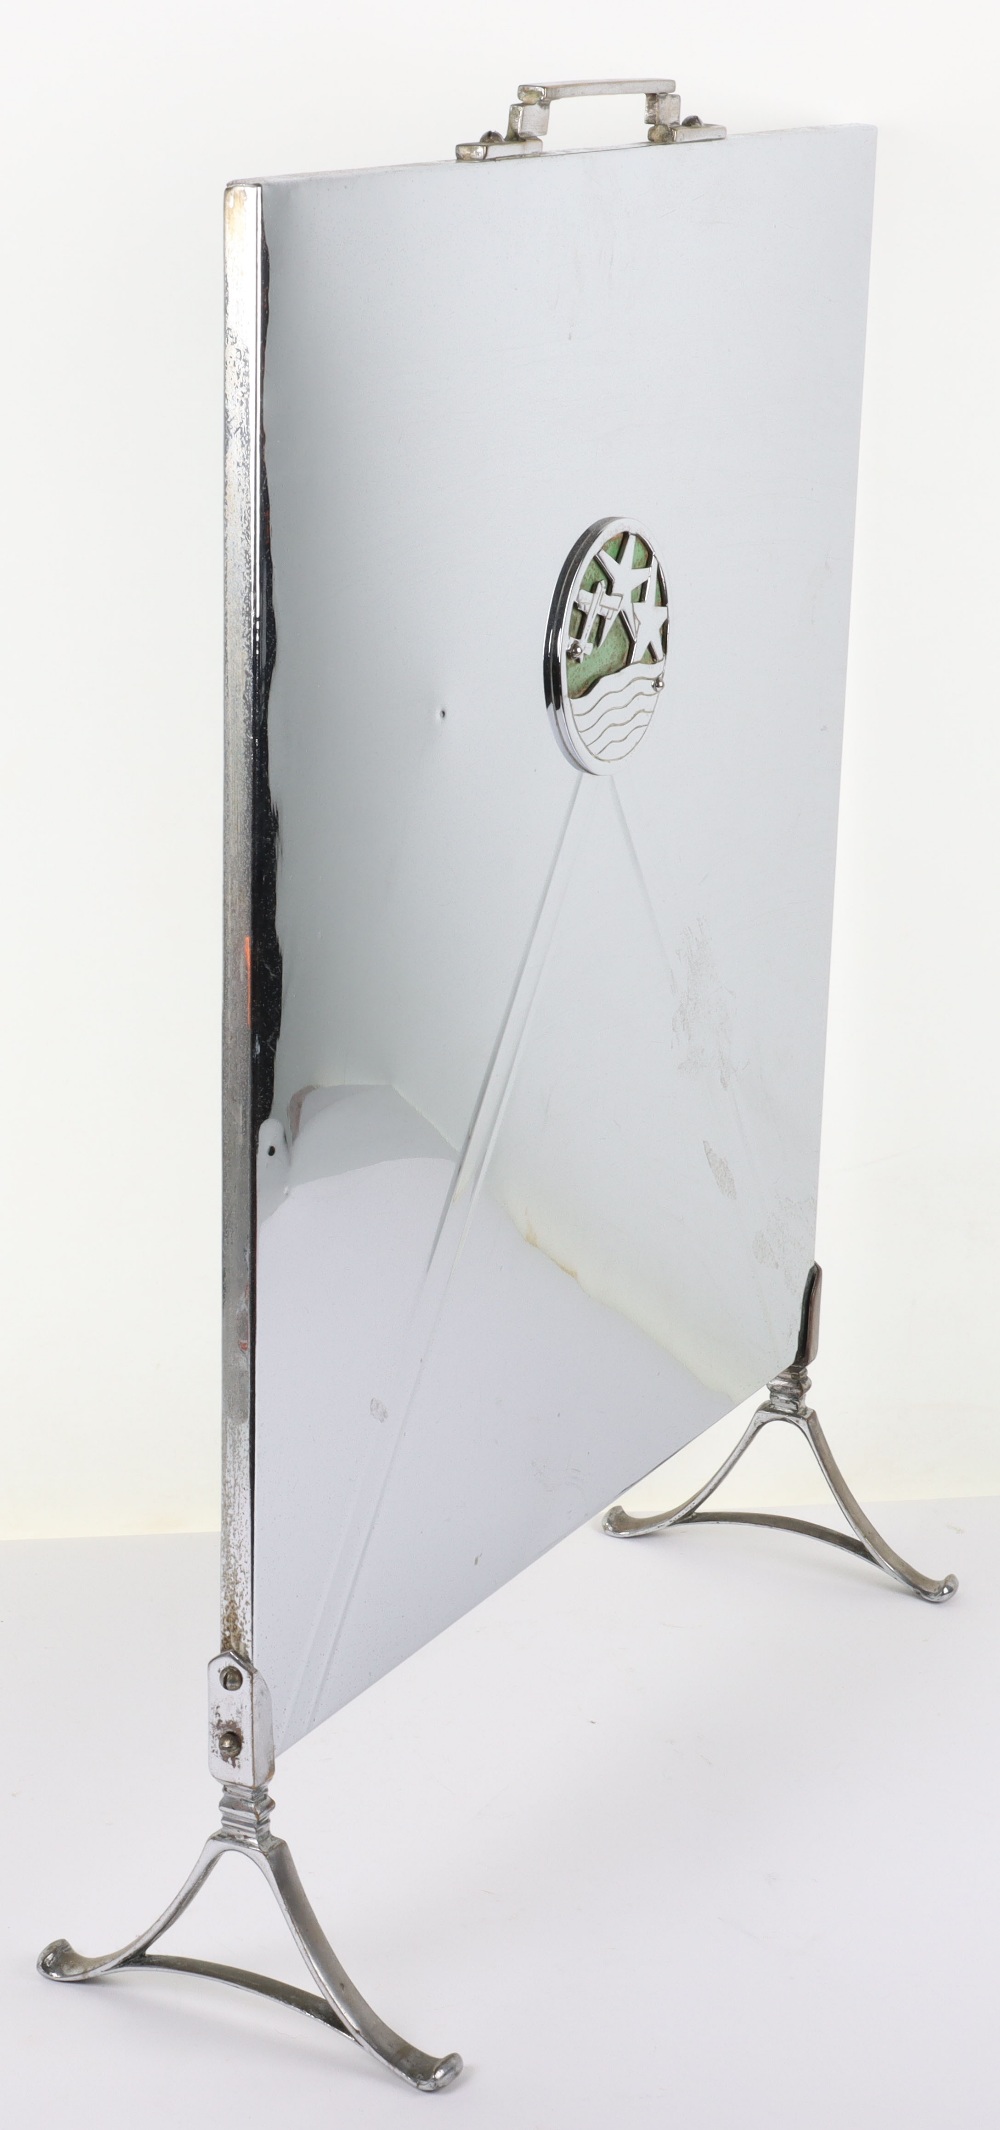 1930’s RAF Upavon Chrome Plated Fire Screen - Image 4 of 6